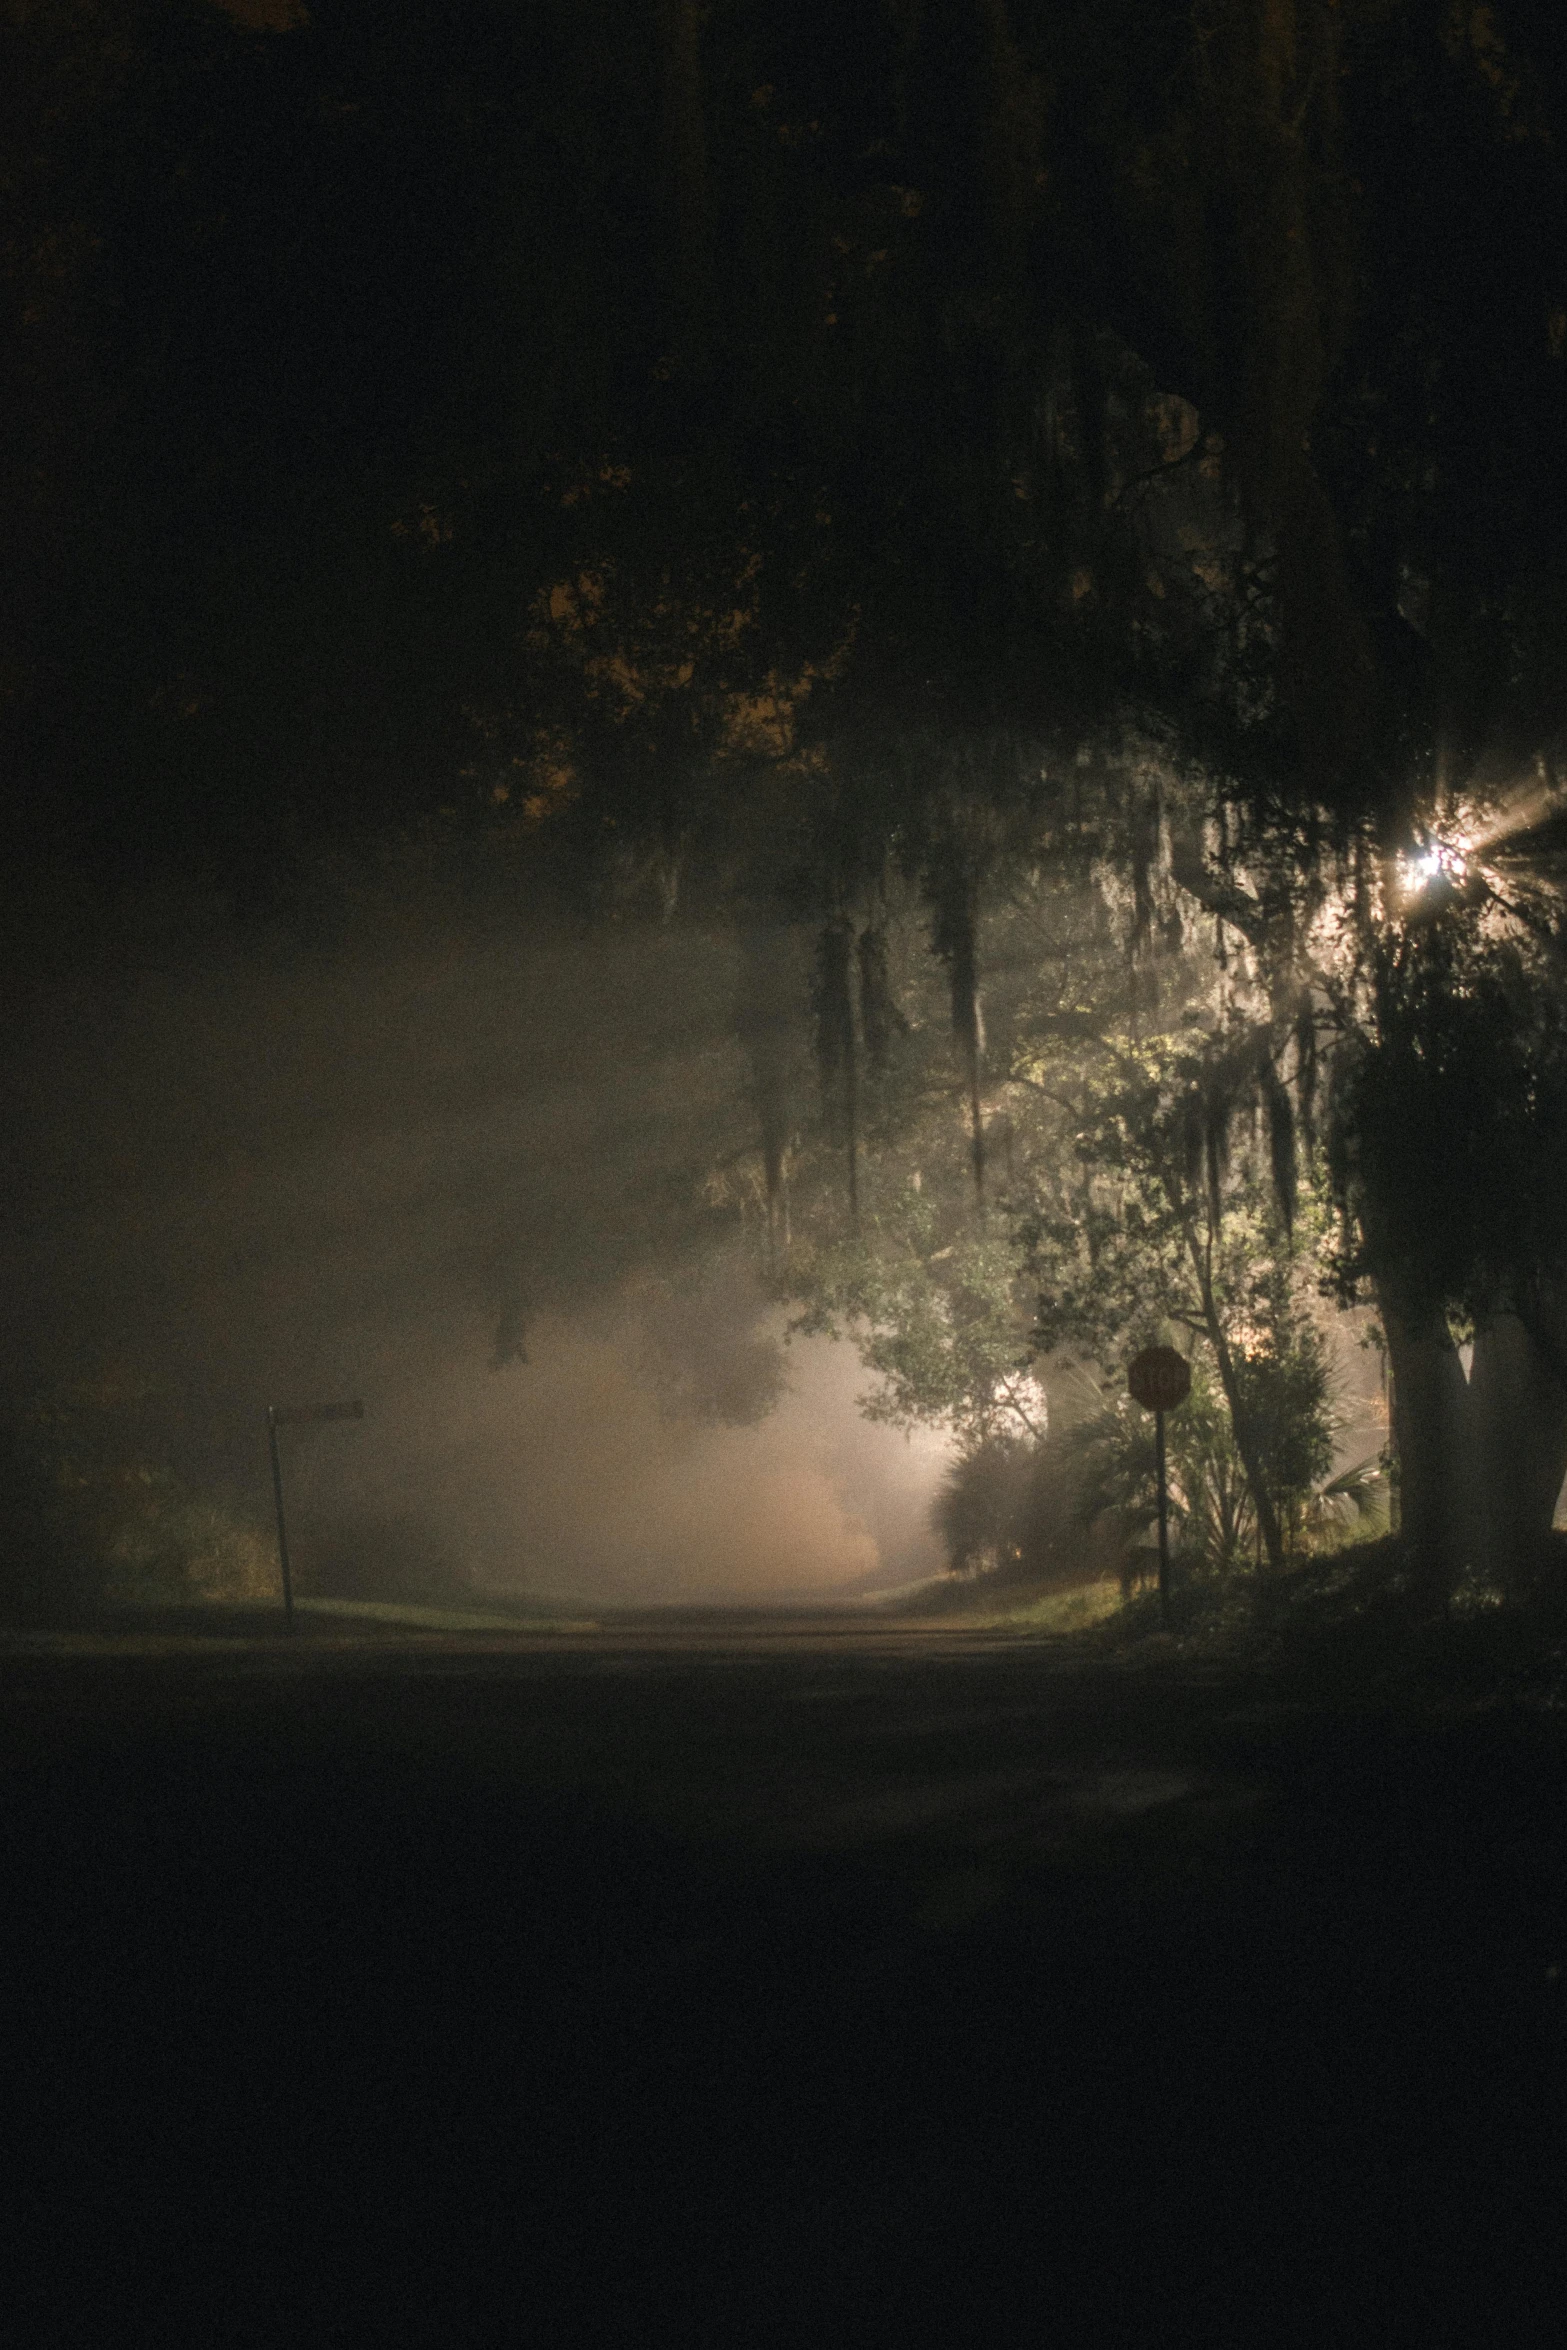 a foggy field at night with trees and street lights